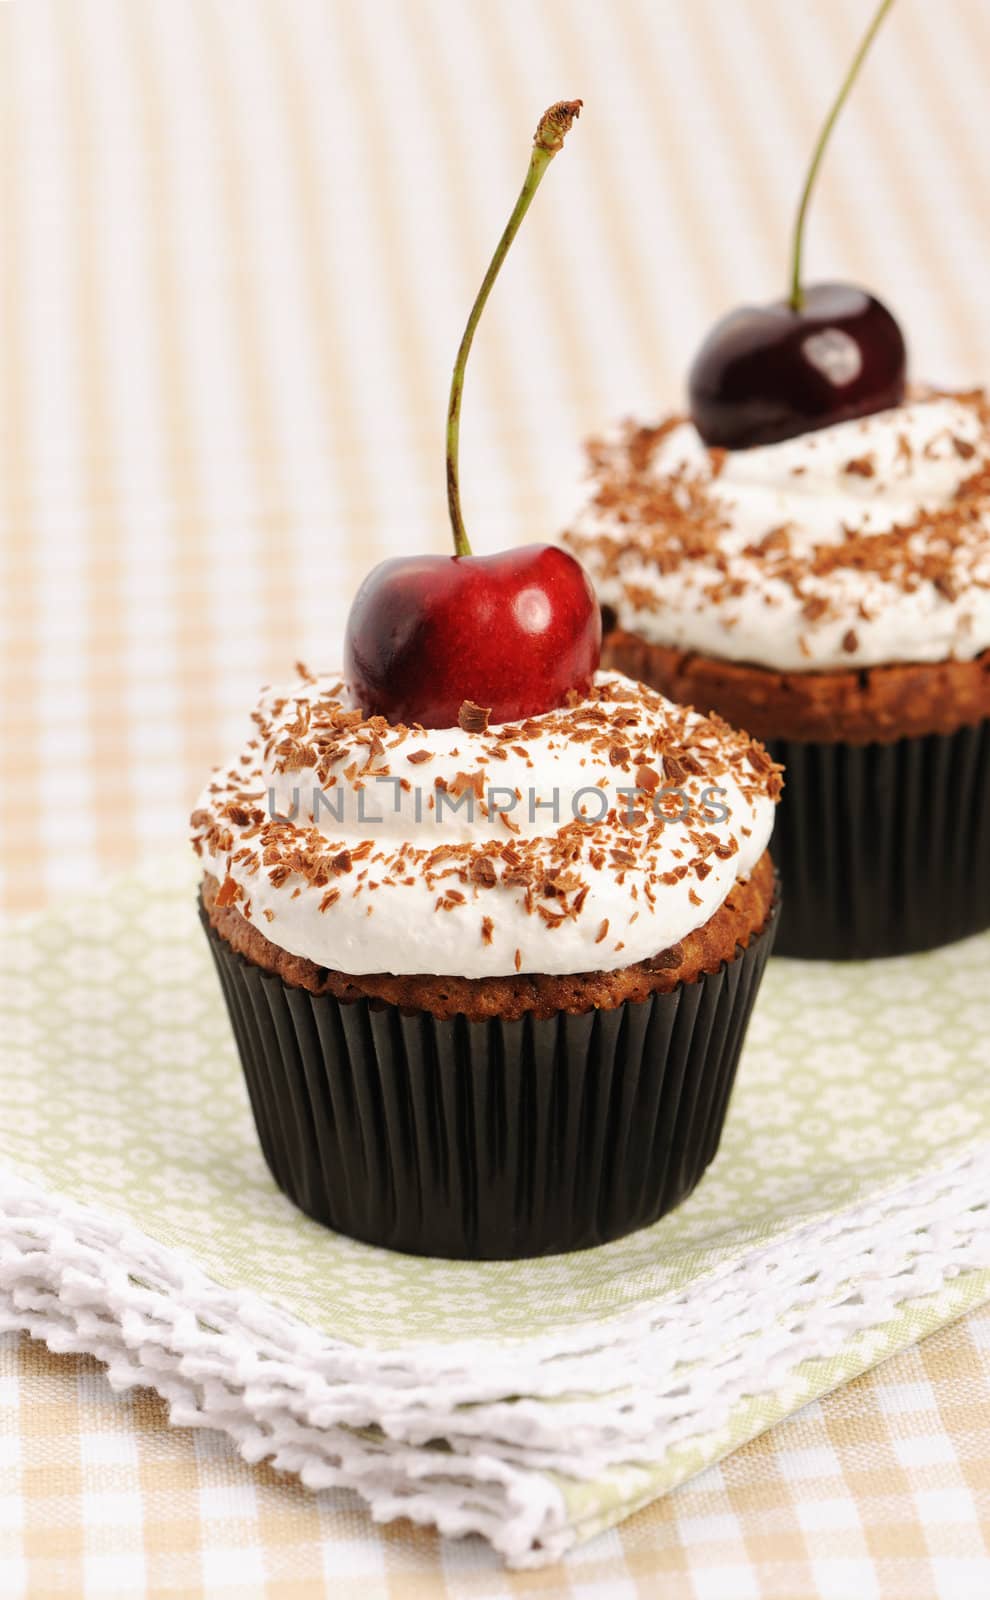 Cupcakes with whipped cream and cherry by haveseen